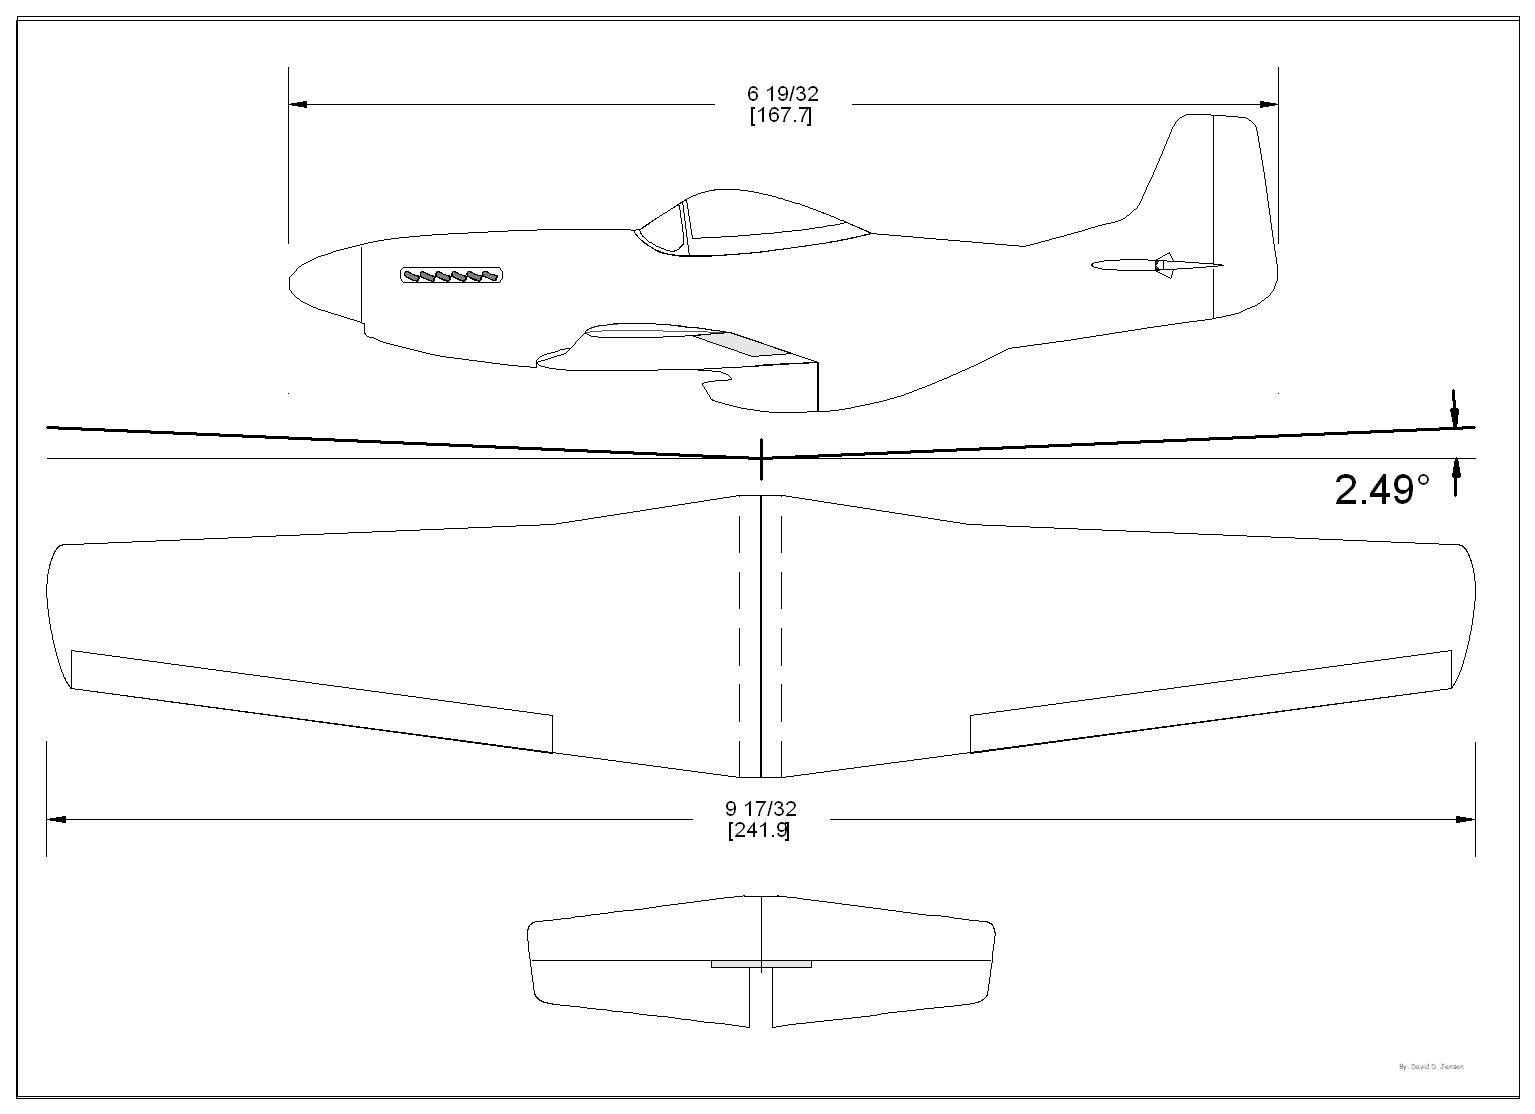 5 Best Images of Printable Paper Airplane Plans Printable Paper